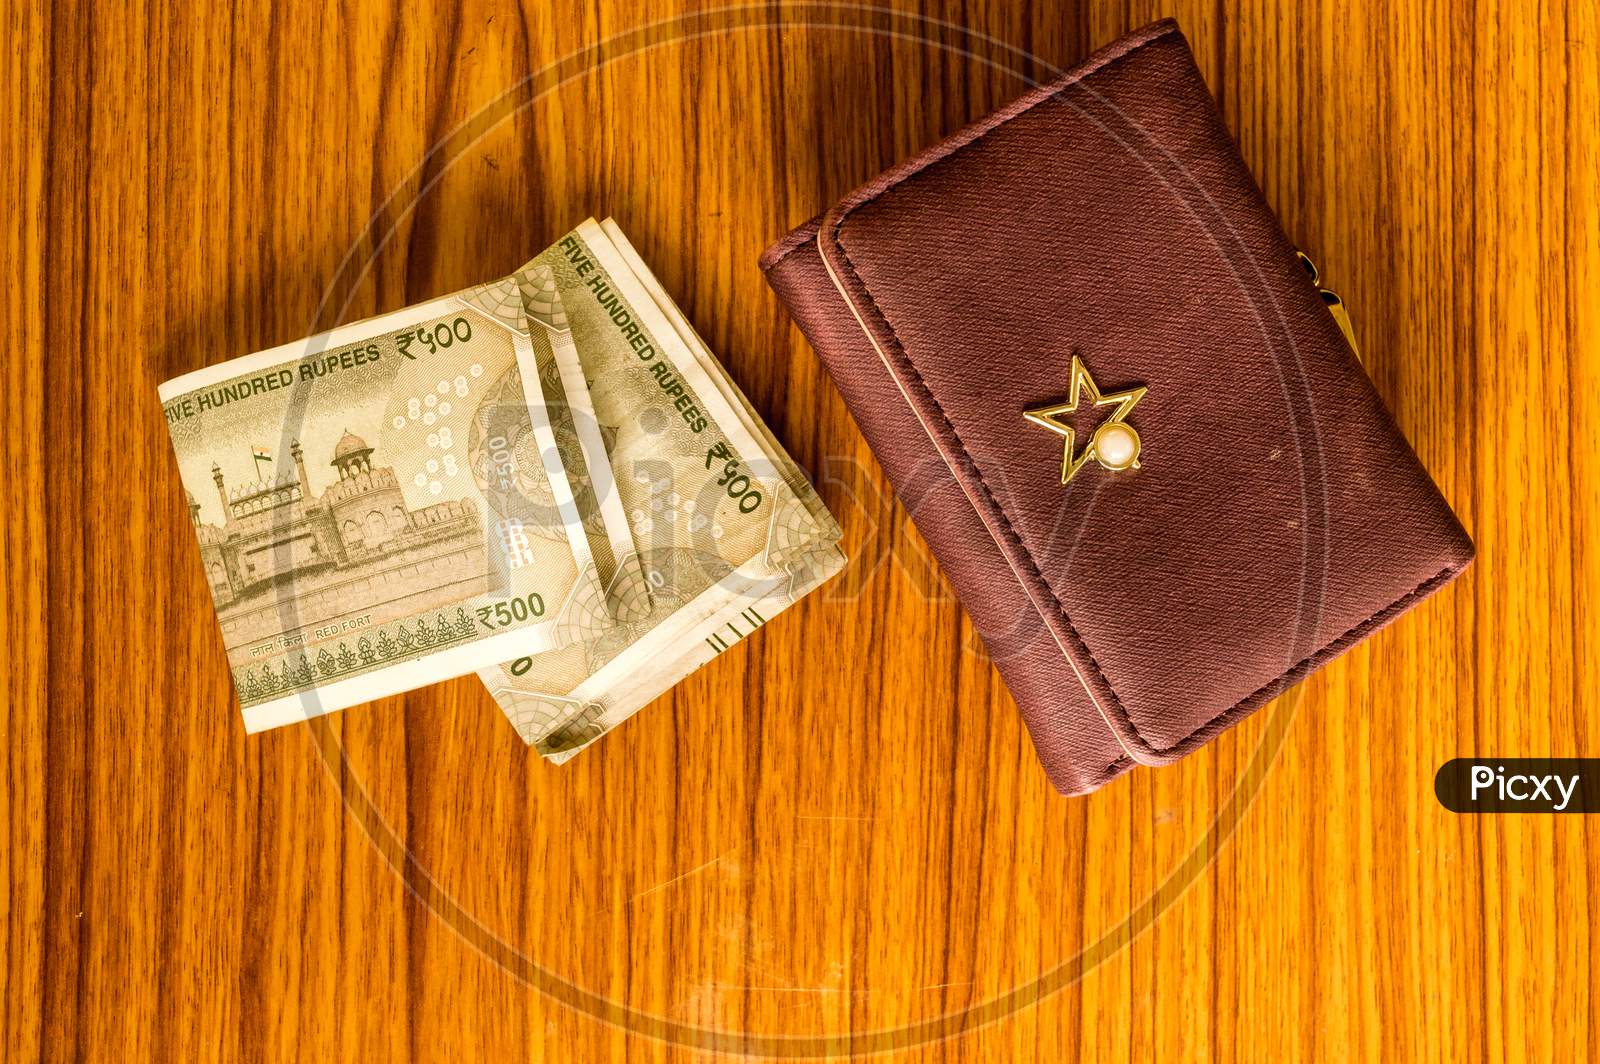 Indian Five Hundred (500) Rupee Cash Note In Brown Color Wallet Leather Purse On A Wooden Table. Business Finance Economy Concept. High Angel View With Copy Space Room For Text On Bottom Side Of Image